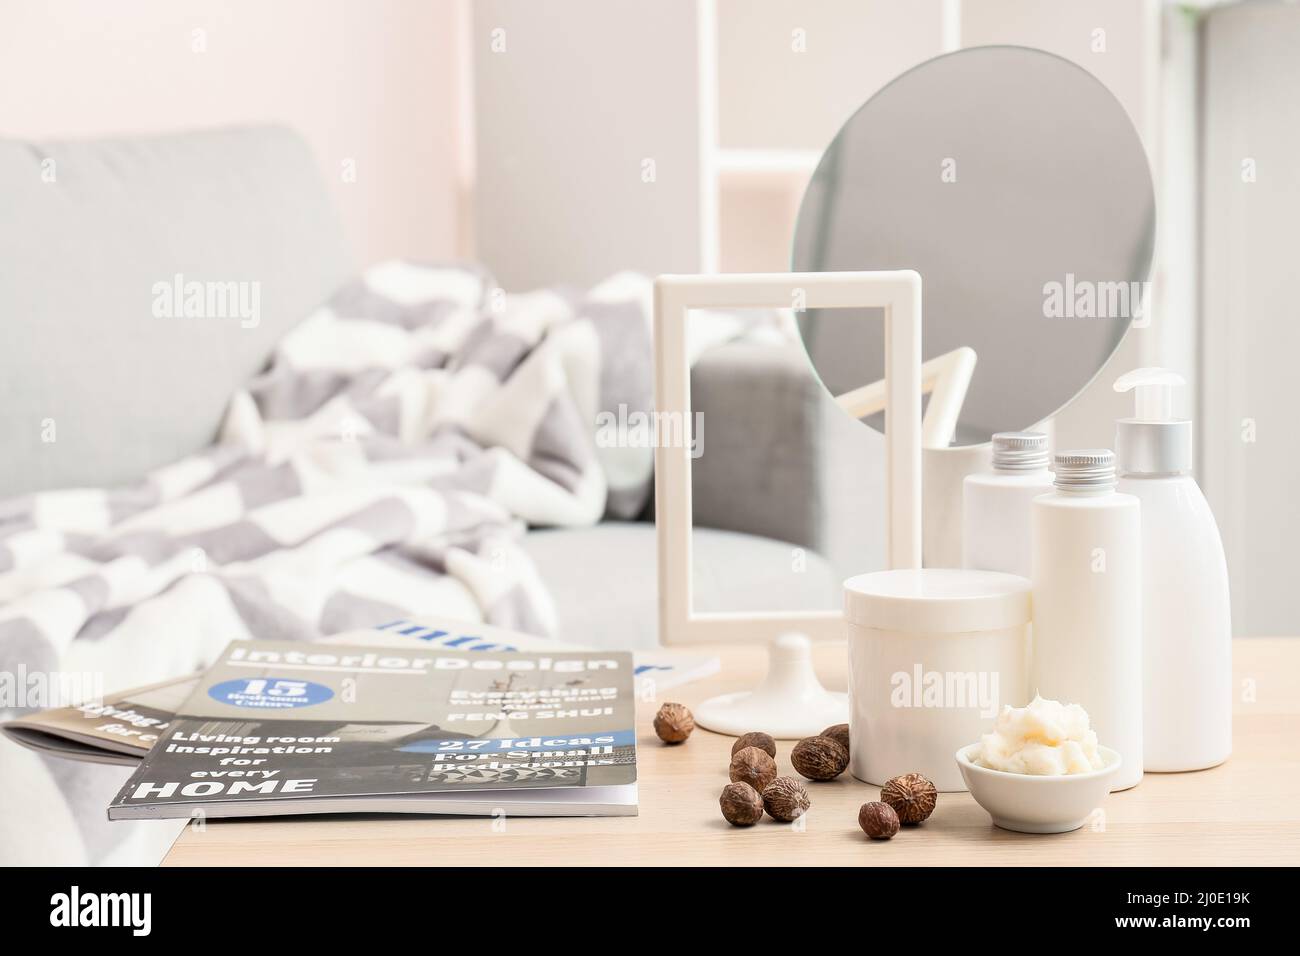 Bowl of shea butter, nuts, cosmetic products and magazines on table in room Stock Photo